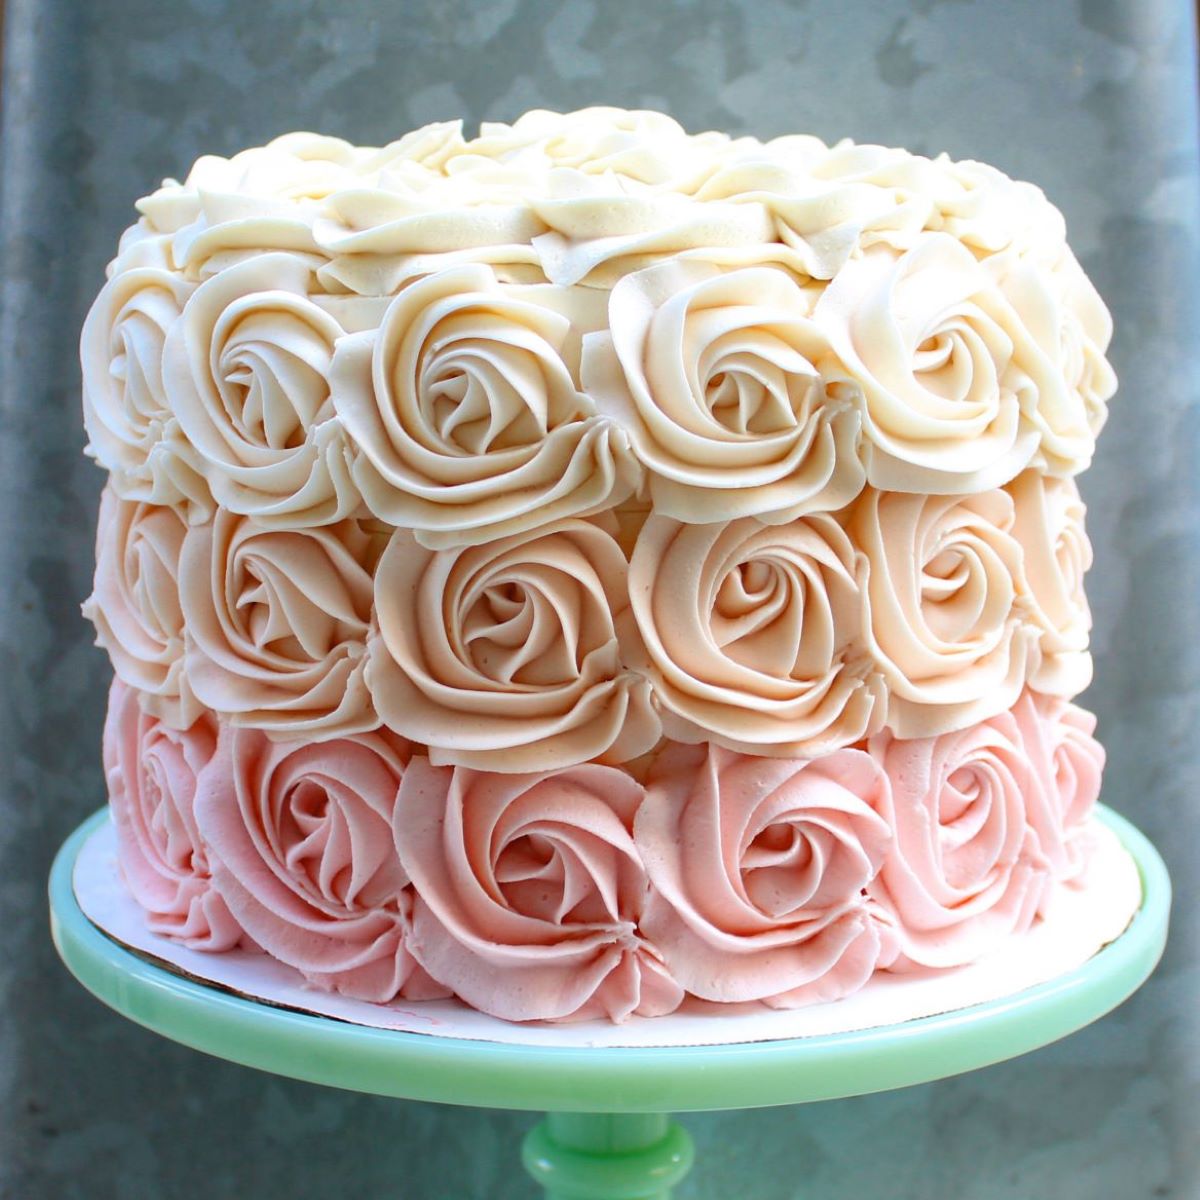 How To Store Cake With Buttercream Frosting